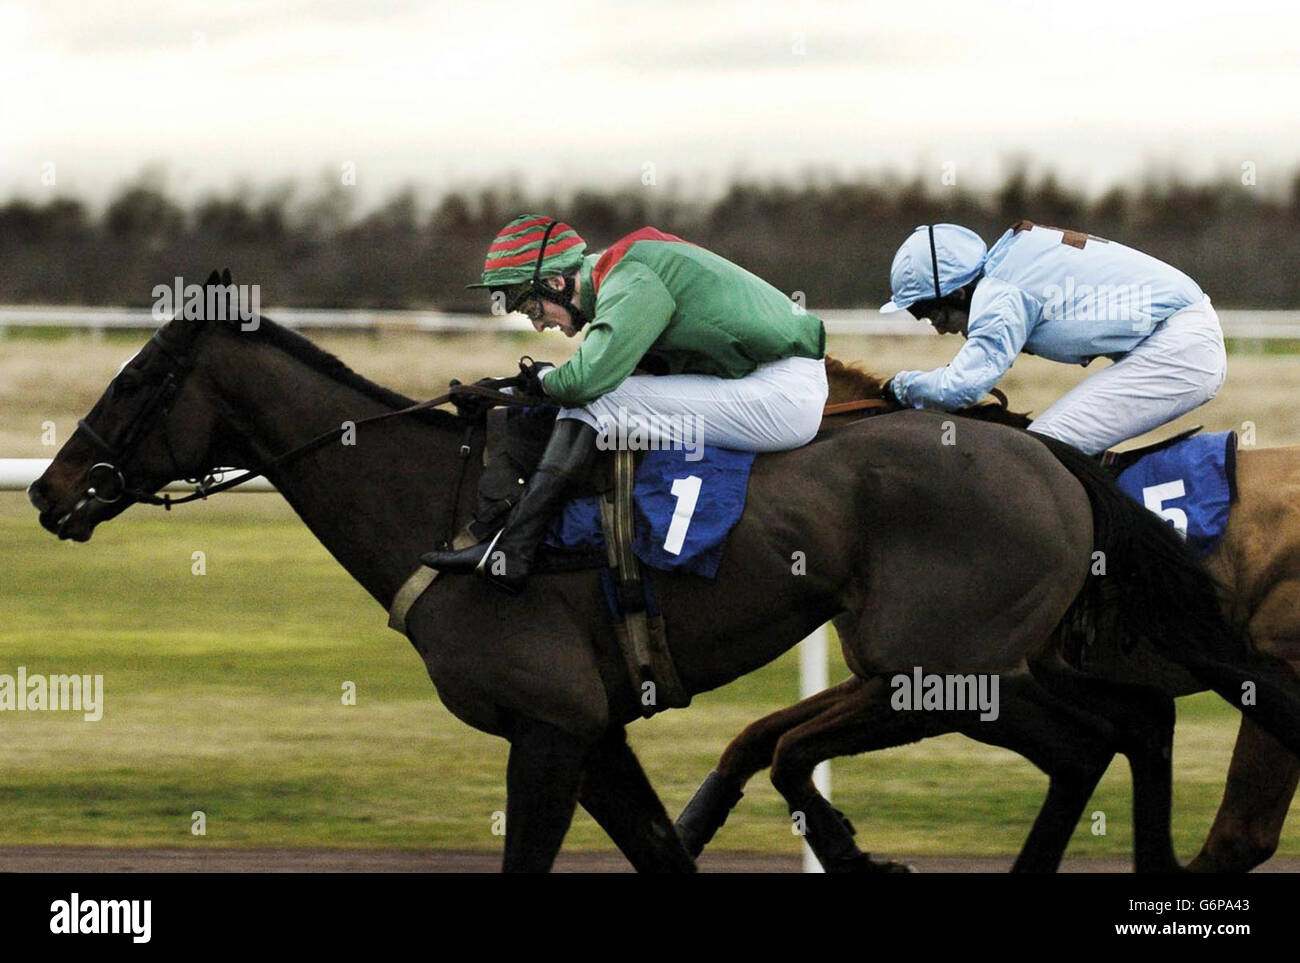 Winner of the Lothian Handycap Steeple chase no5 Silent Snipe comes in to win, as no1 Business Class tries to hold him off at Musselburgh races near Edinburgh. Stock Photo